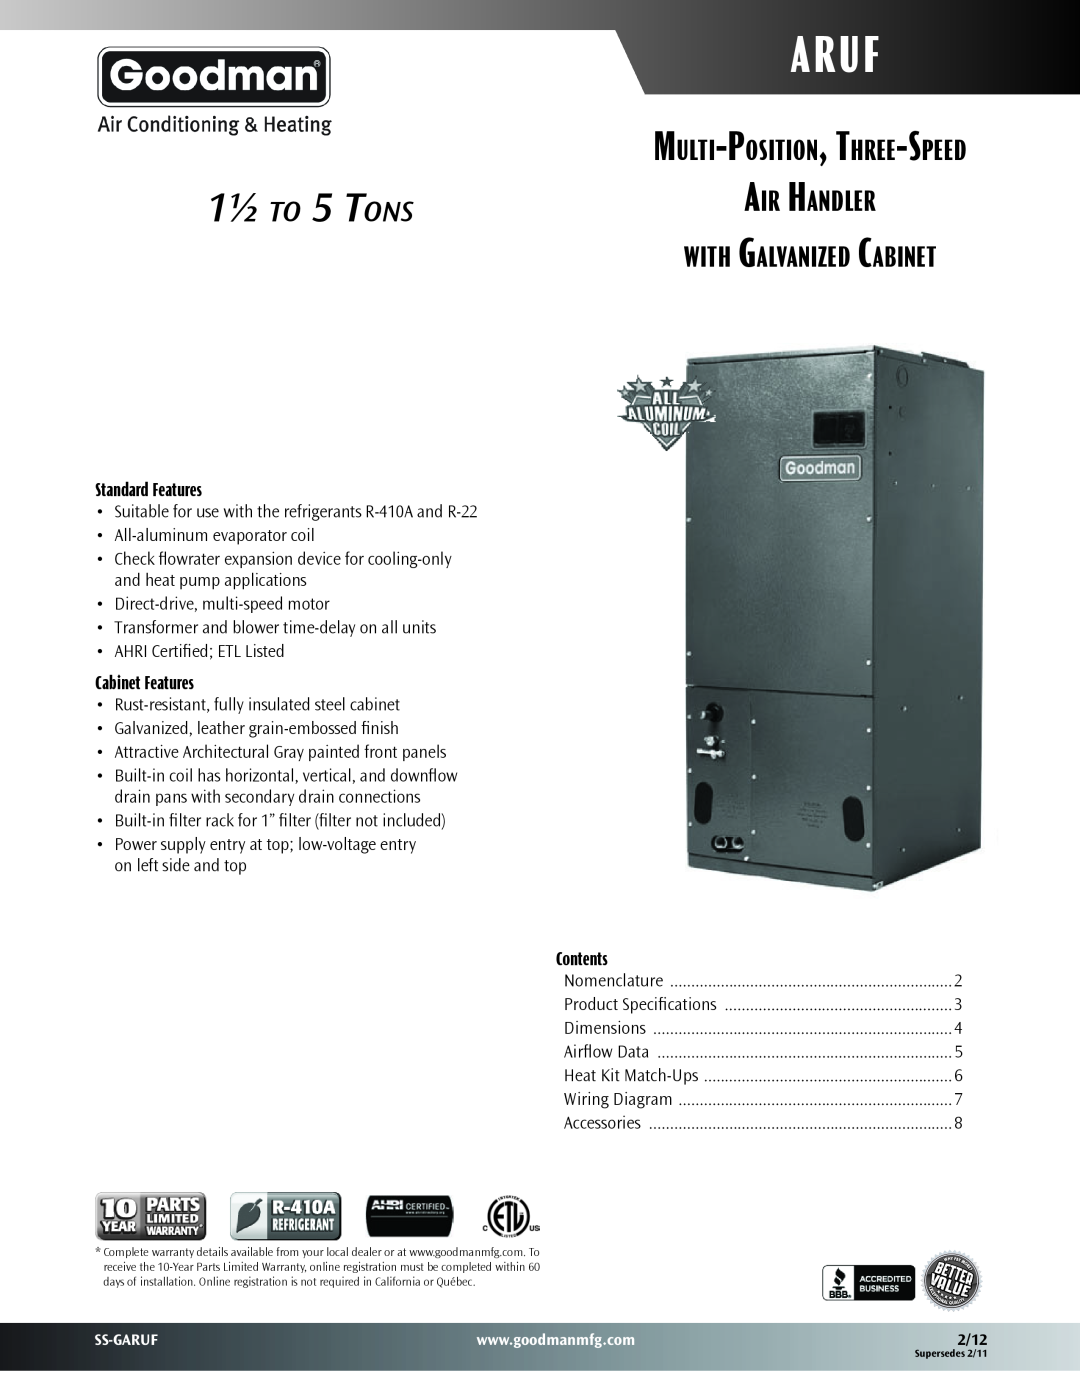 Goodmans Multi-Position, Three-Speed Air Handler With Galvanized Cabinet dimensions Aruf, Standard Features, Contents 